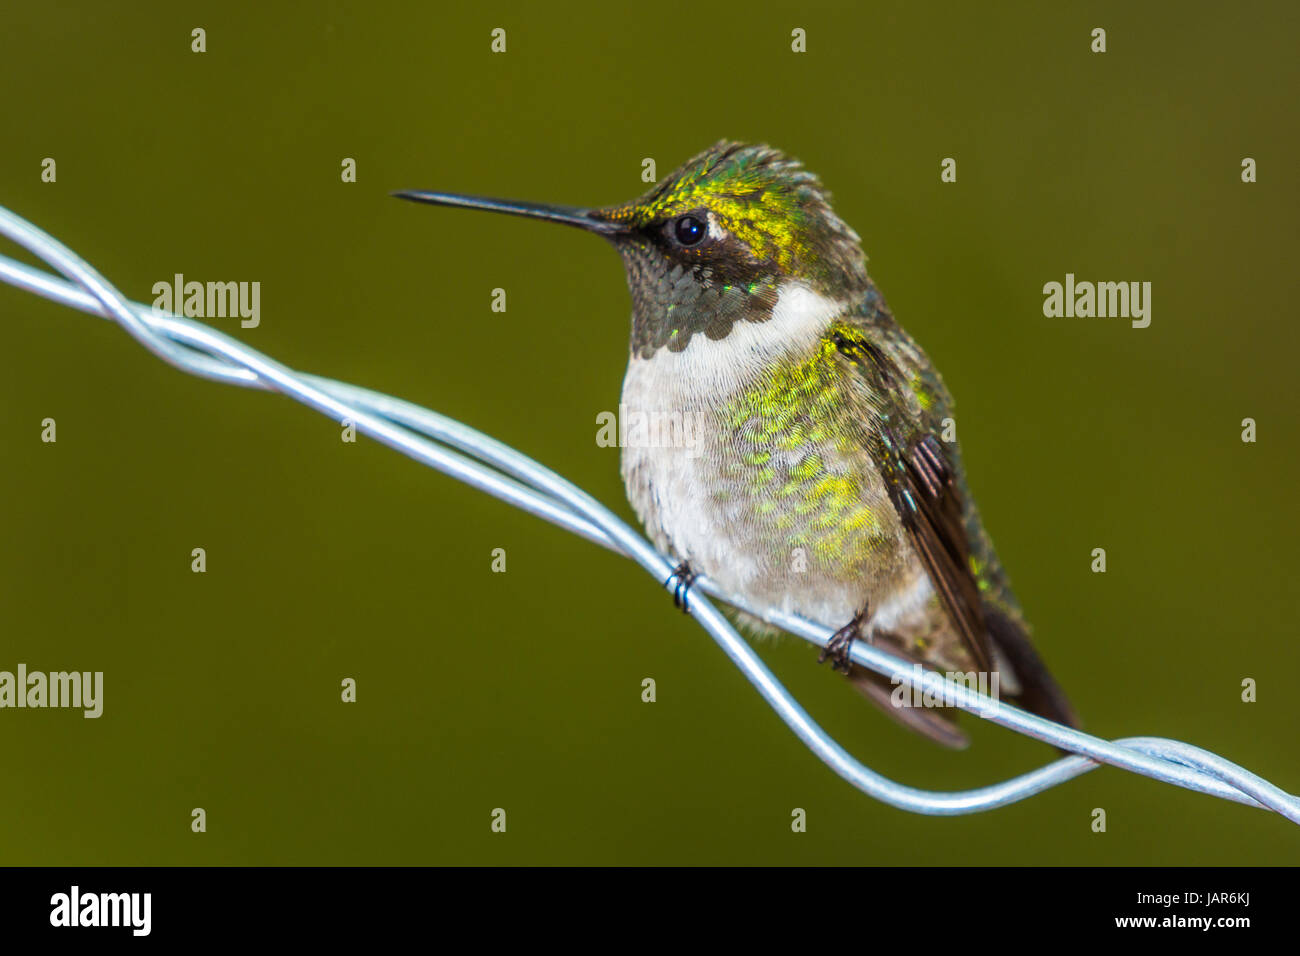 Ruby throated hummingbird (Archilochus colubris) perched on a wire Stock Photo